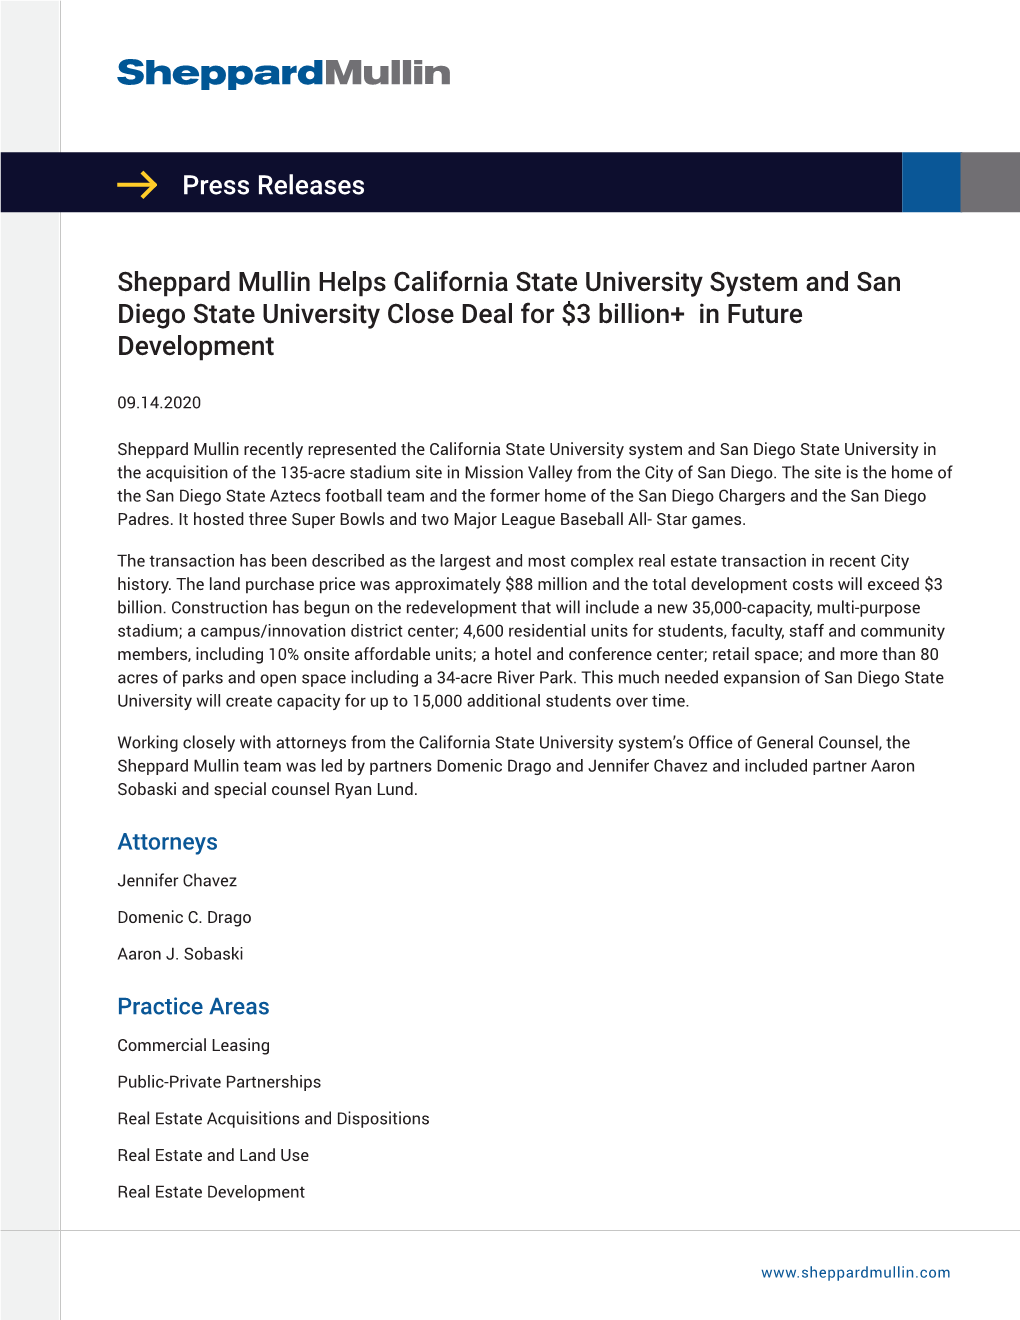 Press Releases Sheppard Mullin Helps California State University